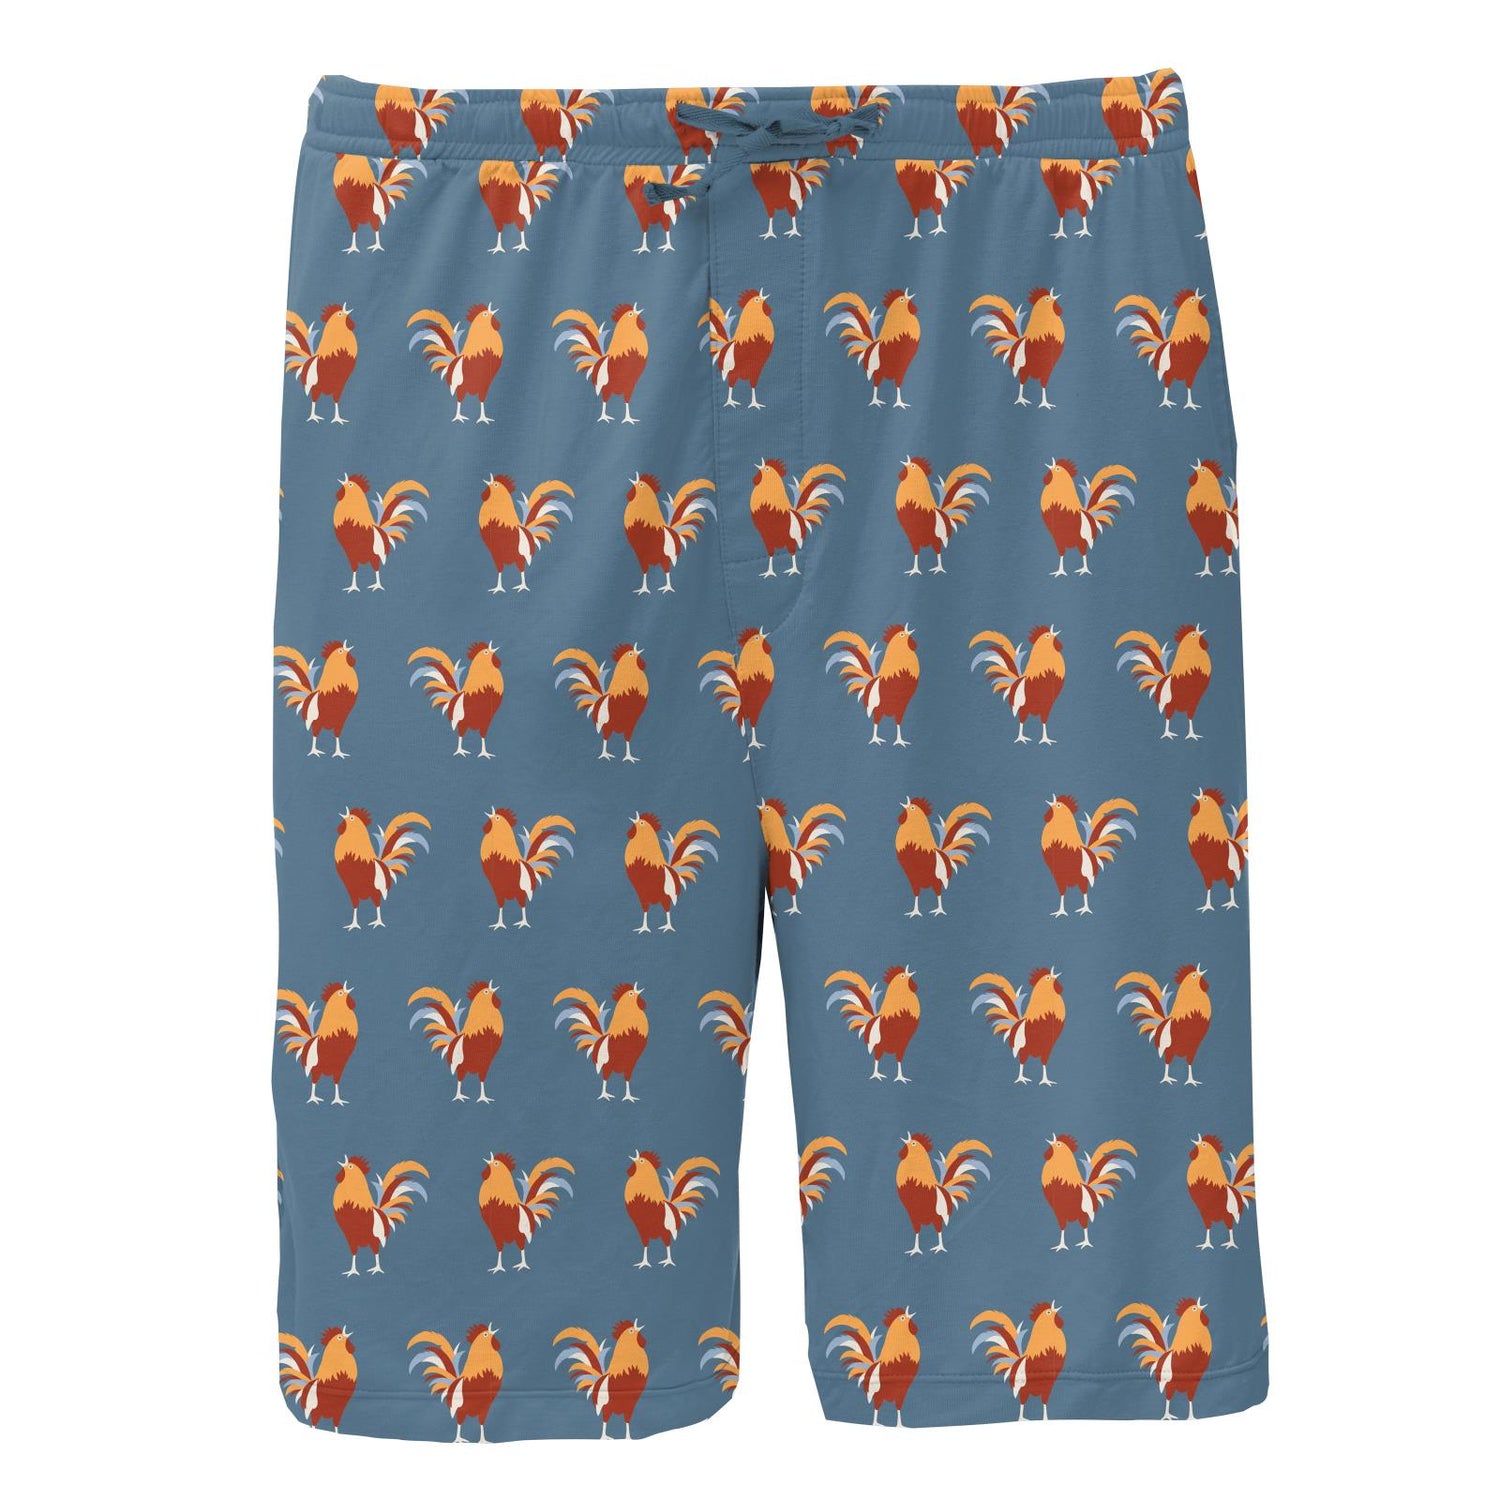 Men's Print Lounge Shorts in Parisian Rooster